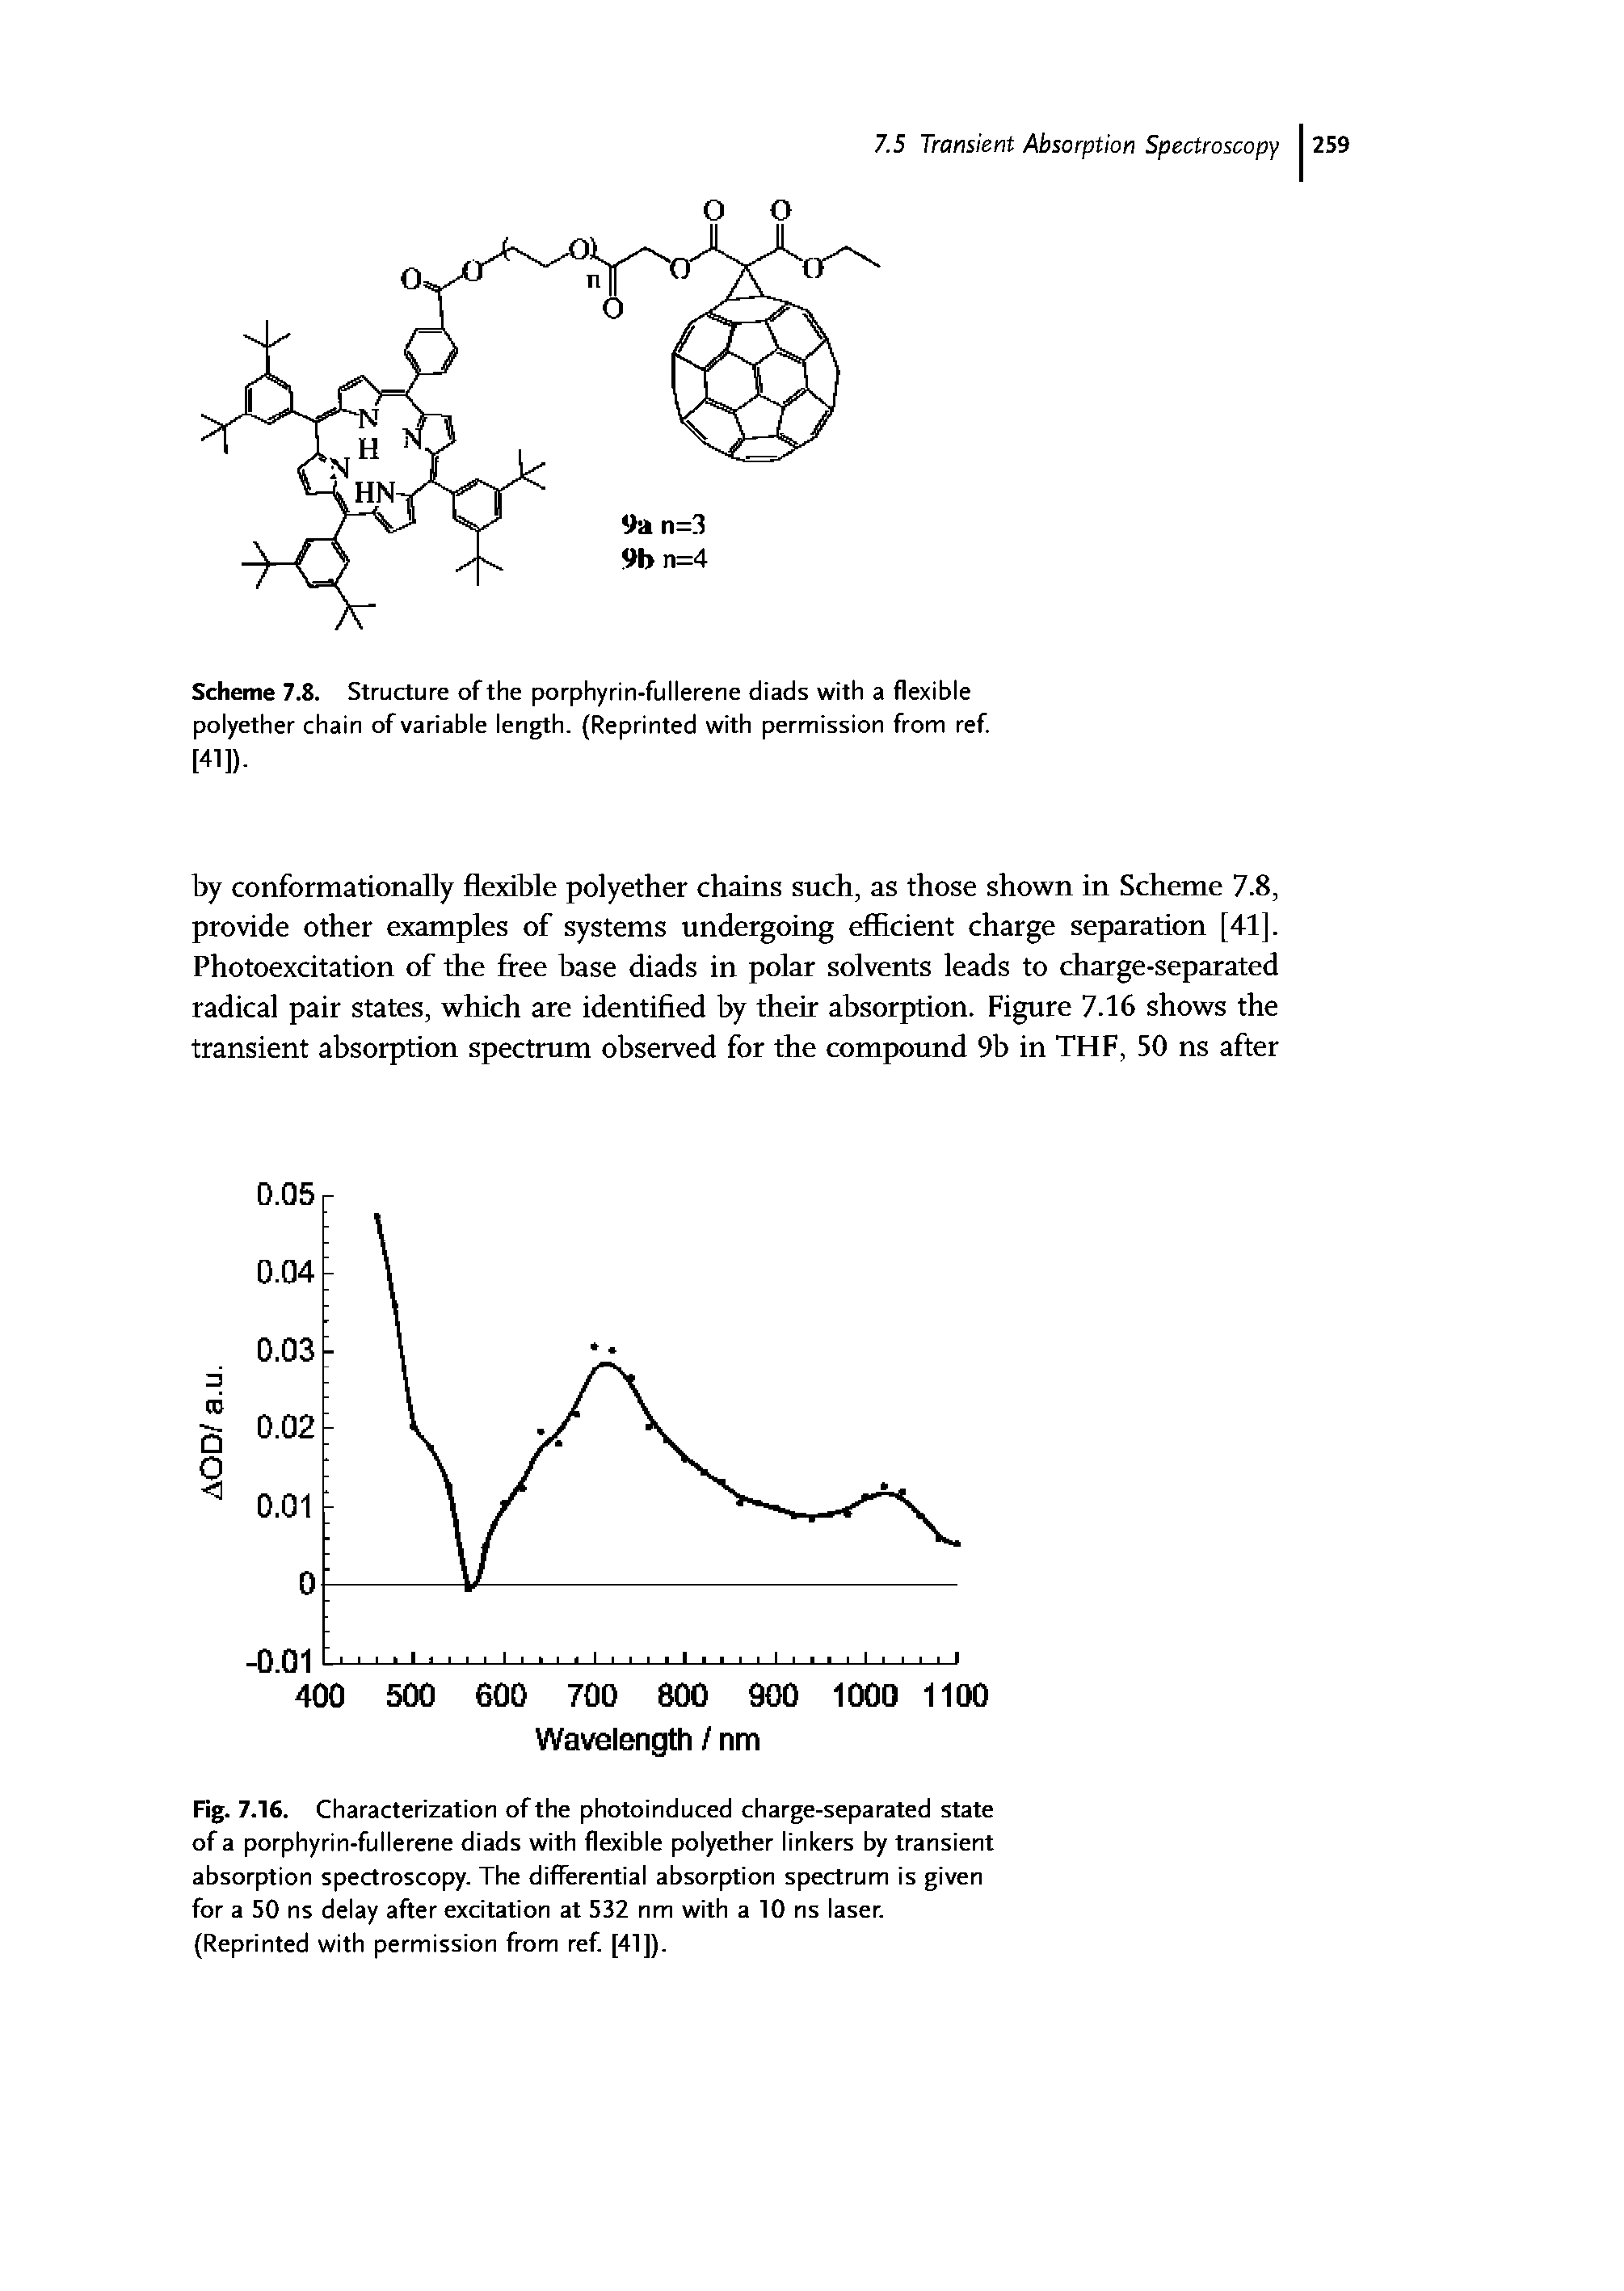 Fig. 7.16. Characterization of the photoinduced charge-separated state of a porphyrin-fullerene diads with flexible polyether linkers by transient absorption spectroscopy. The differential absorption spectrum is given for a 50 ns delay after excitation at 532 nm with a 10 ns laser. (Reprinted with permission from ref. [41]).